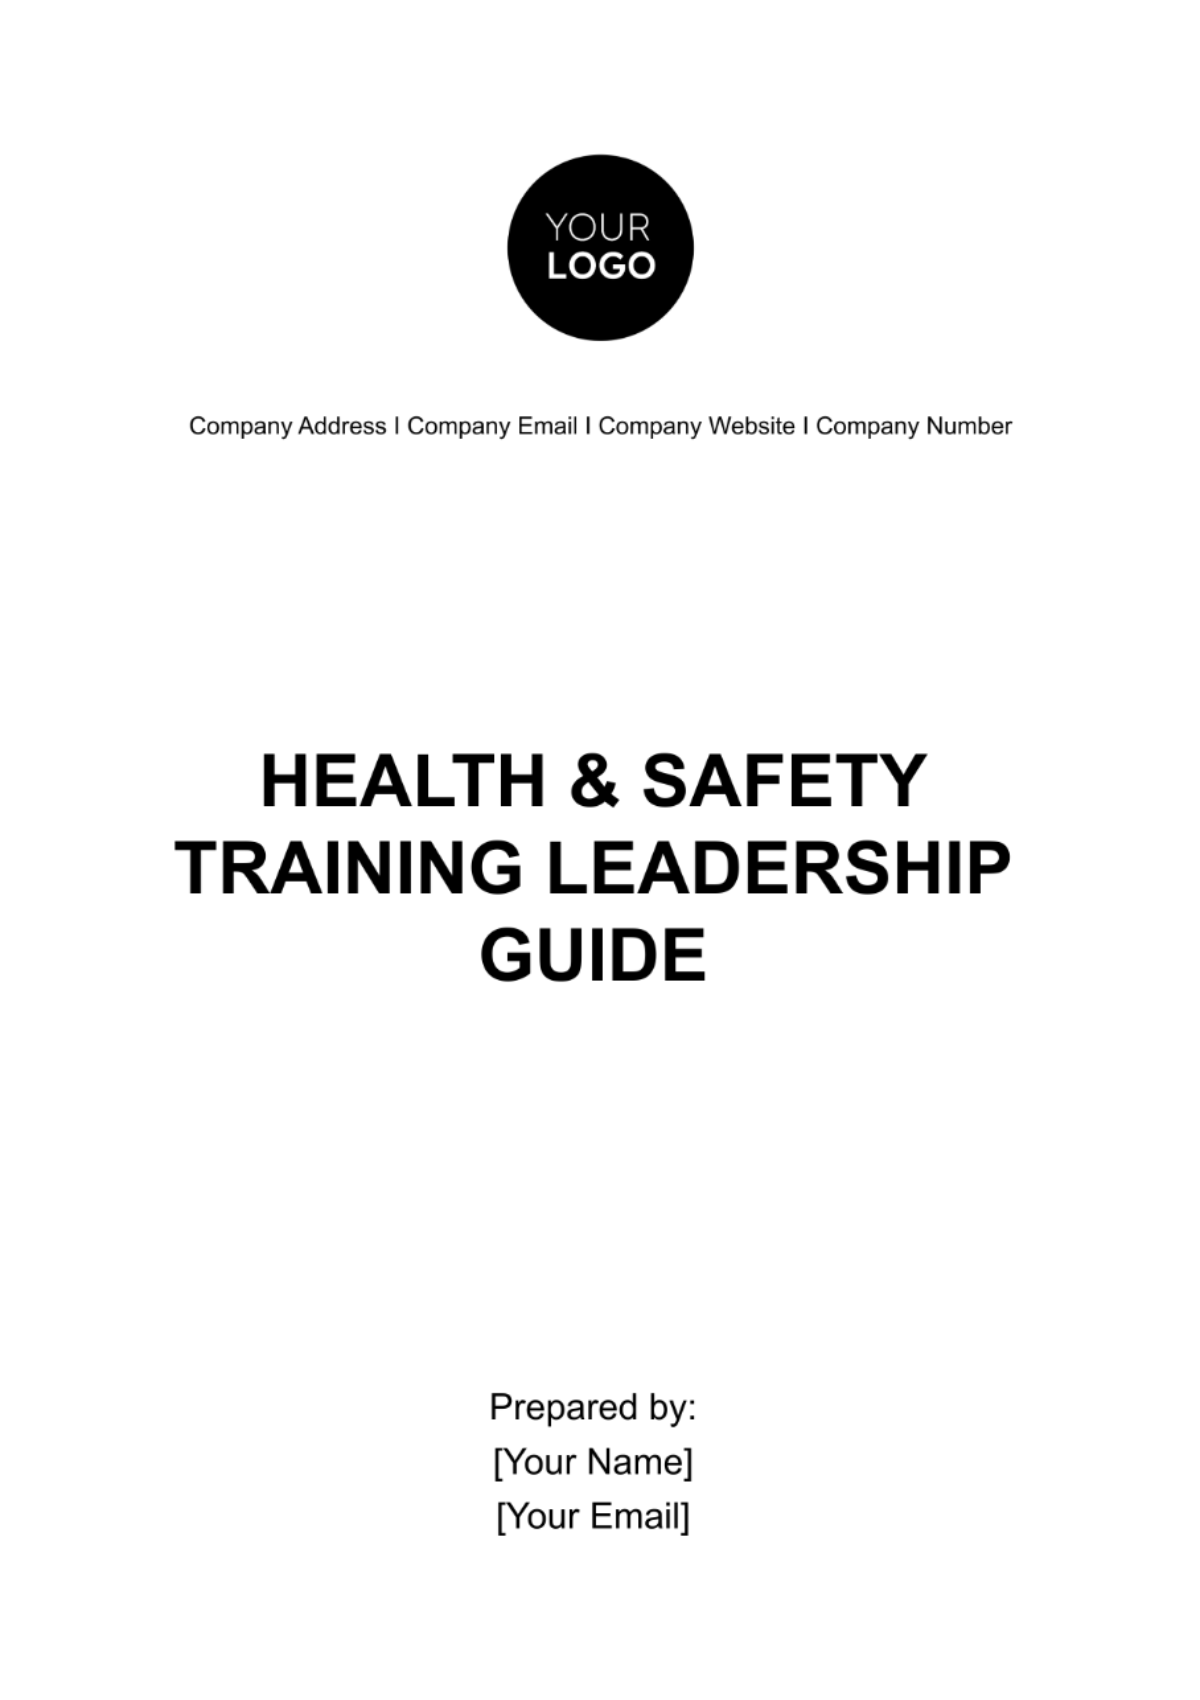 Health & Safety Training Leadership Guide Template